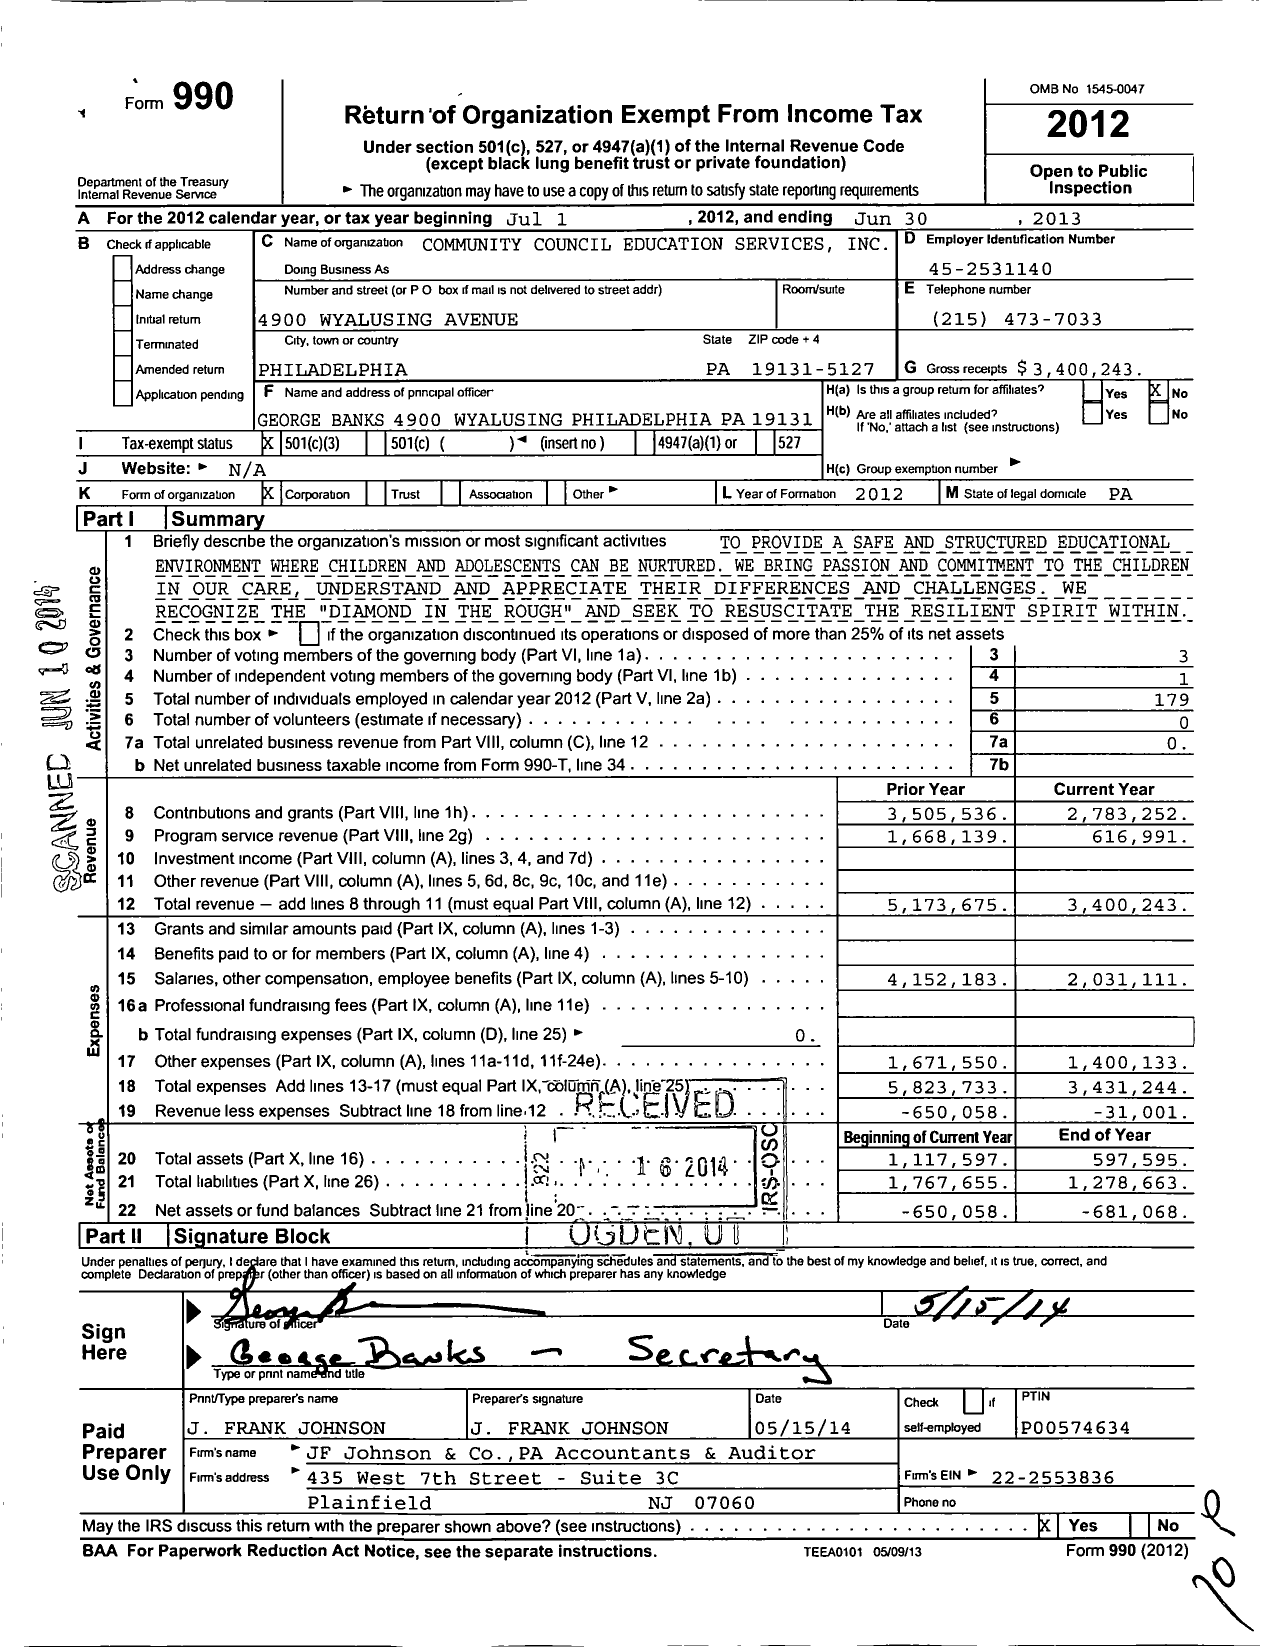 Image of first page of 2012 Form 990 for Community Council Education Services